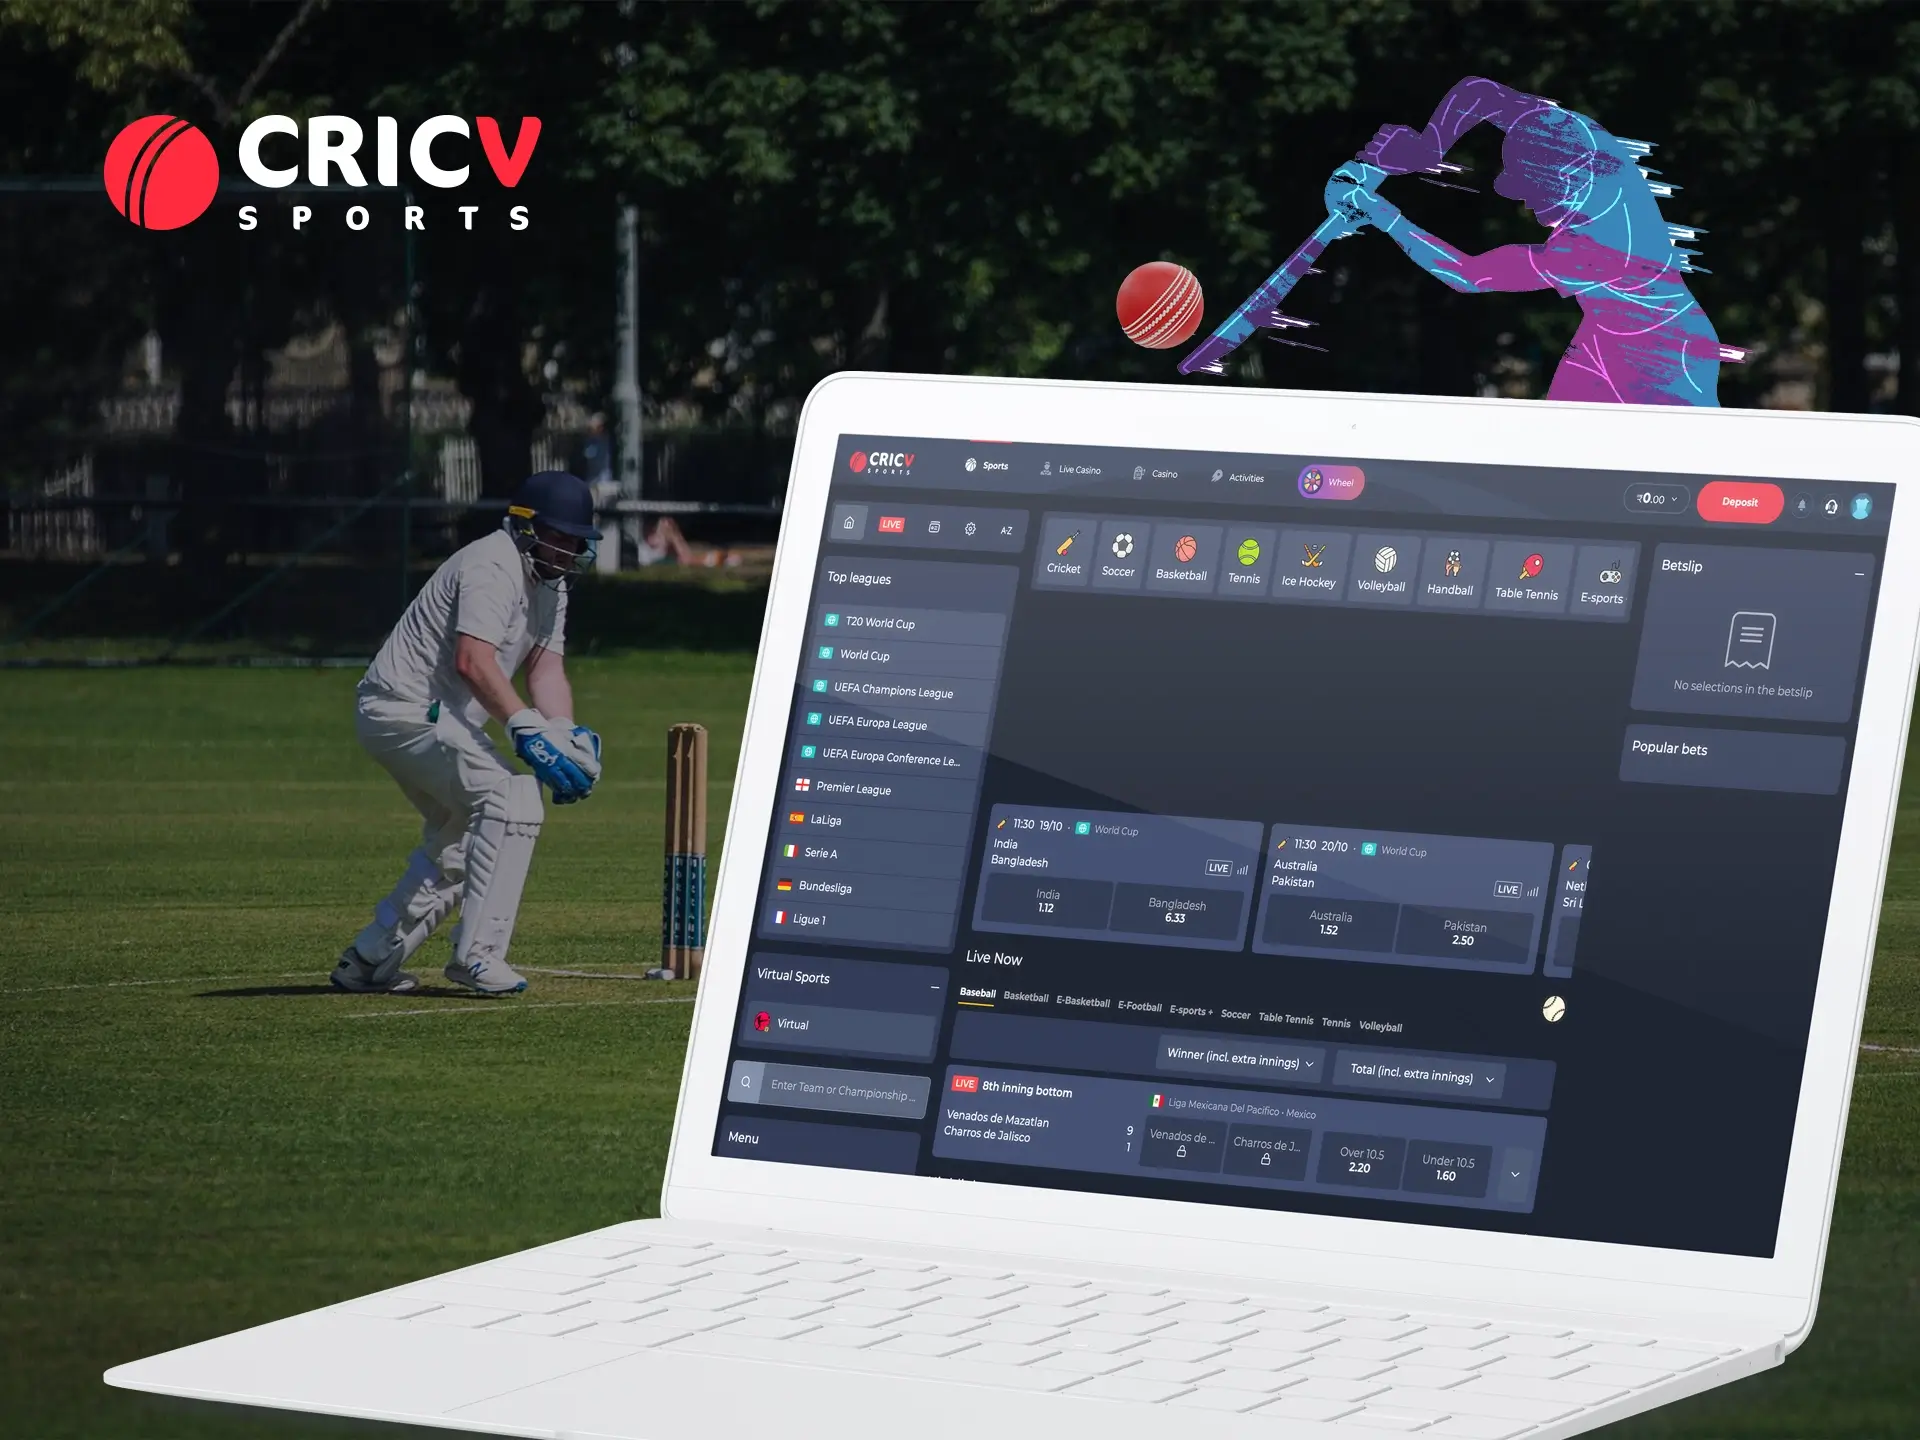 Sports enthusiasts will find a variety of sporting activities at Cricv.